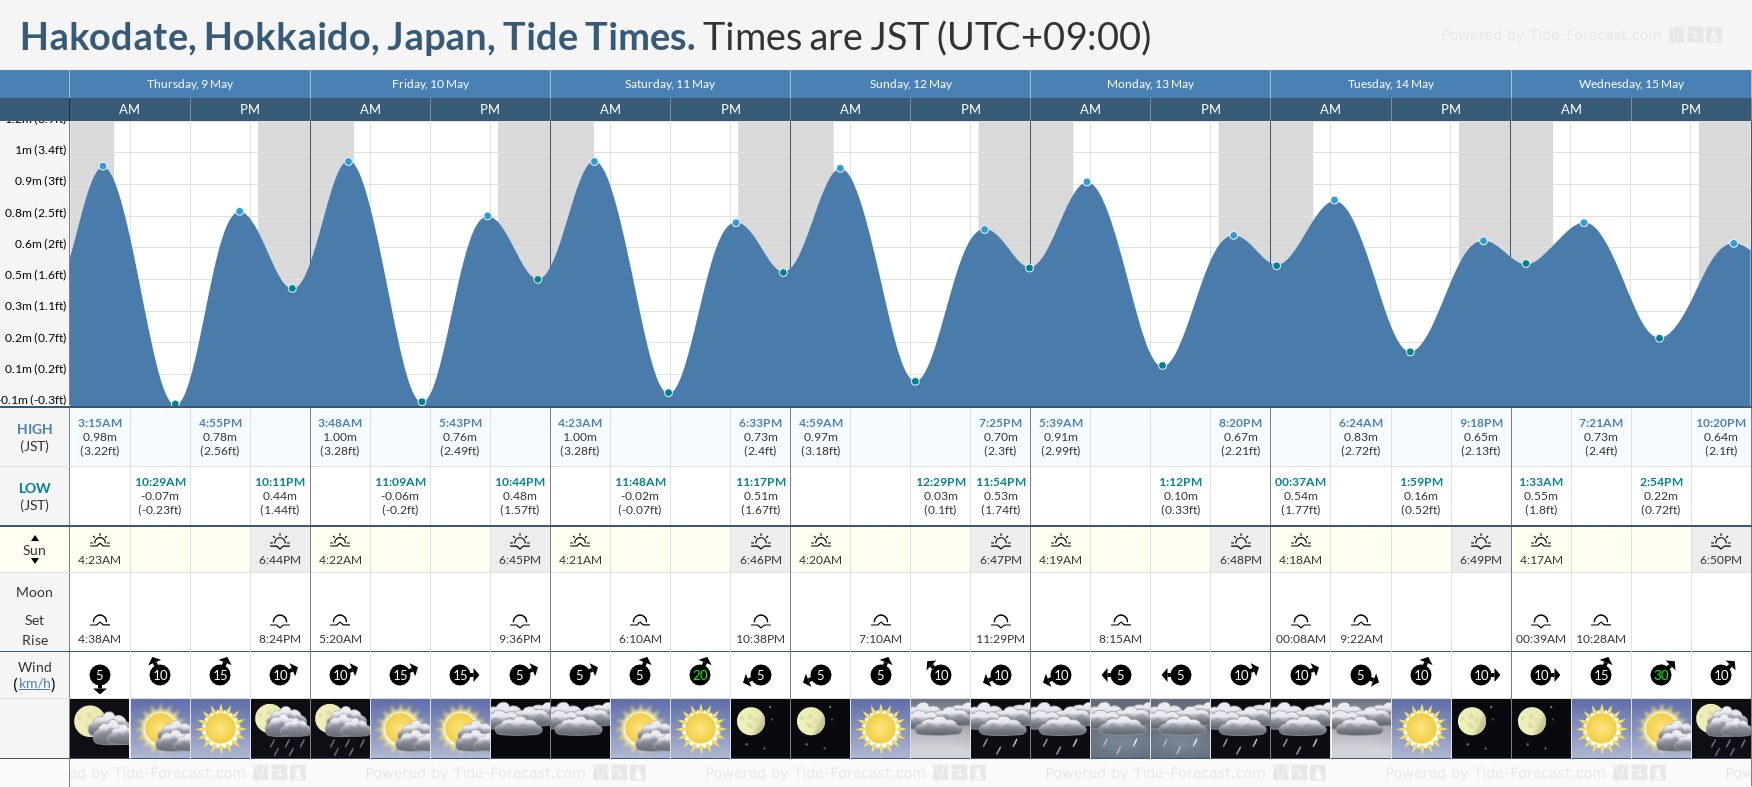 Hakodate, Hokkaido, Japan Tide Chart including high and low tide tide times for the next 7 days